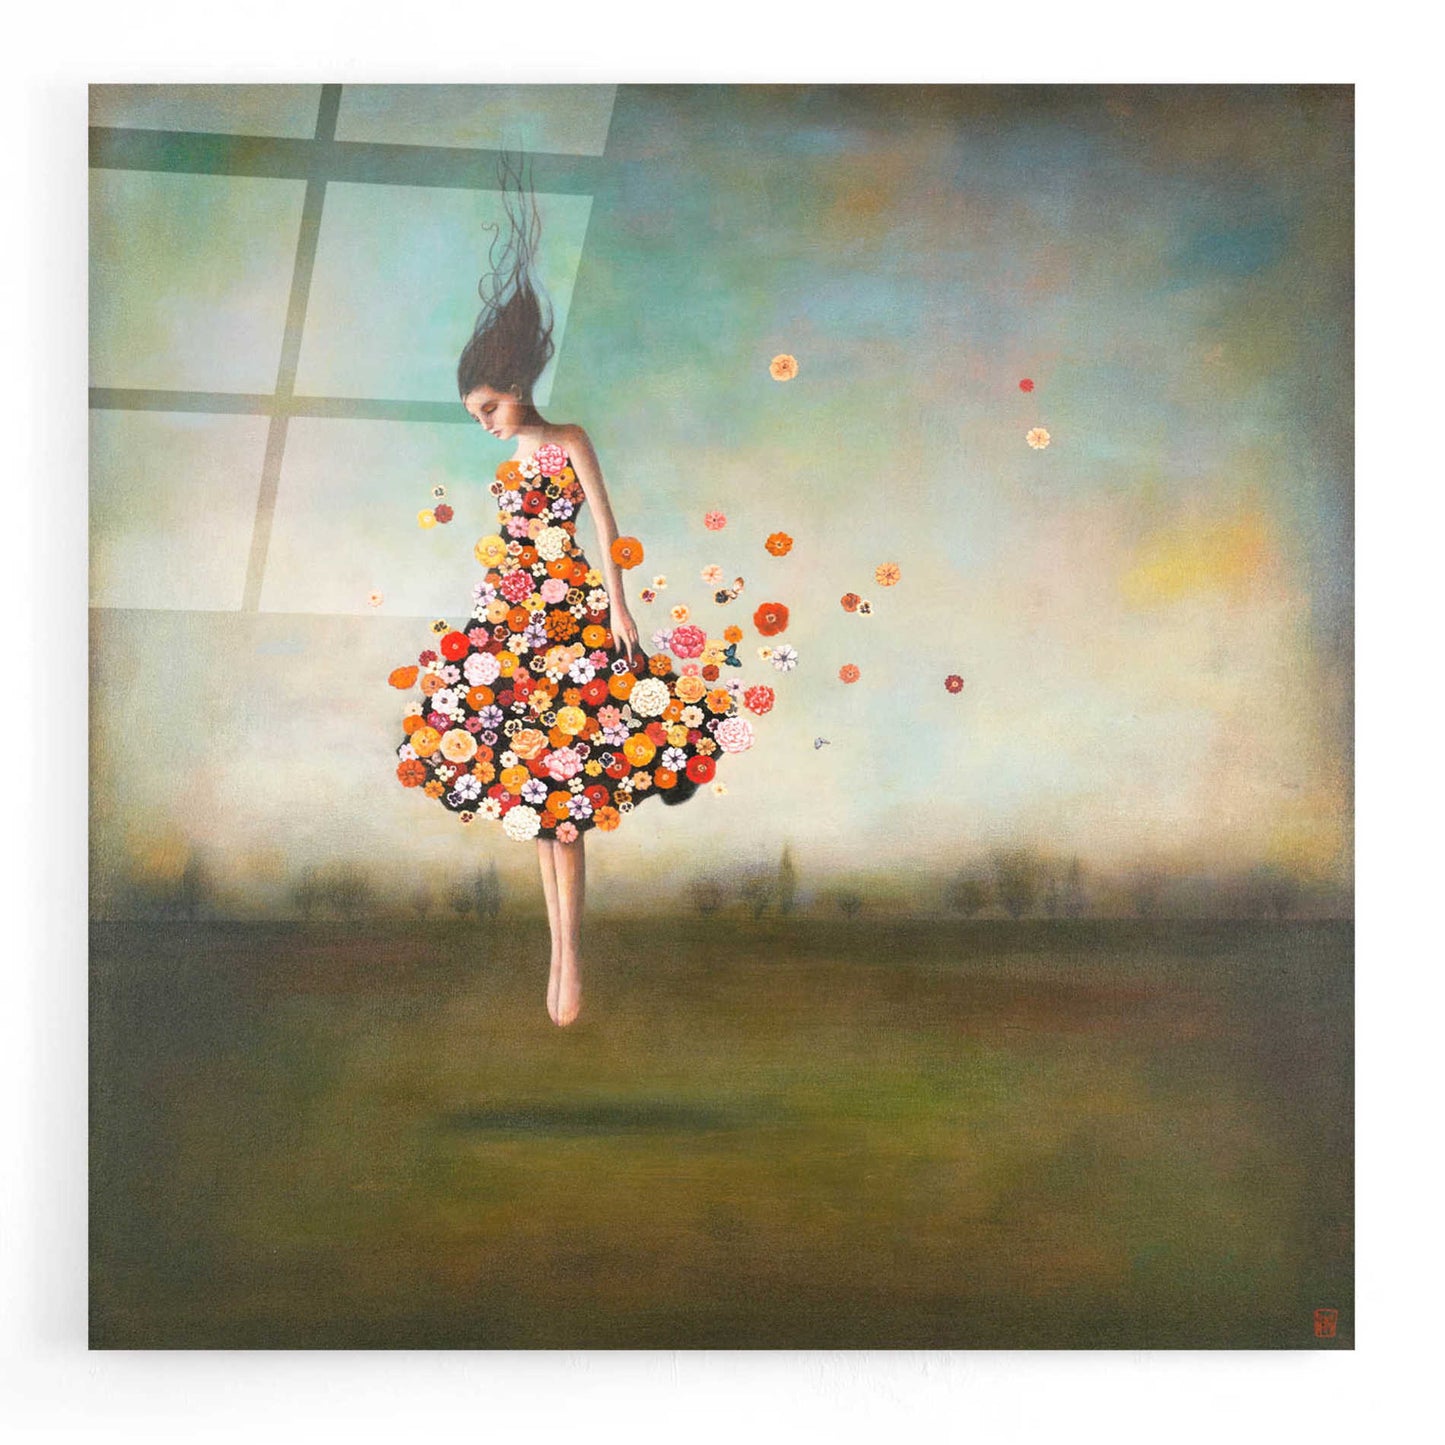 Epic Art 'Boundlessness in Bloom' by Duy Huynh, Acrylic Glass Wall Art,12x12